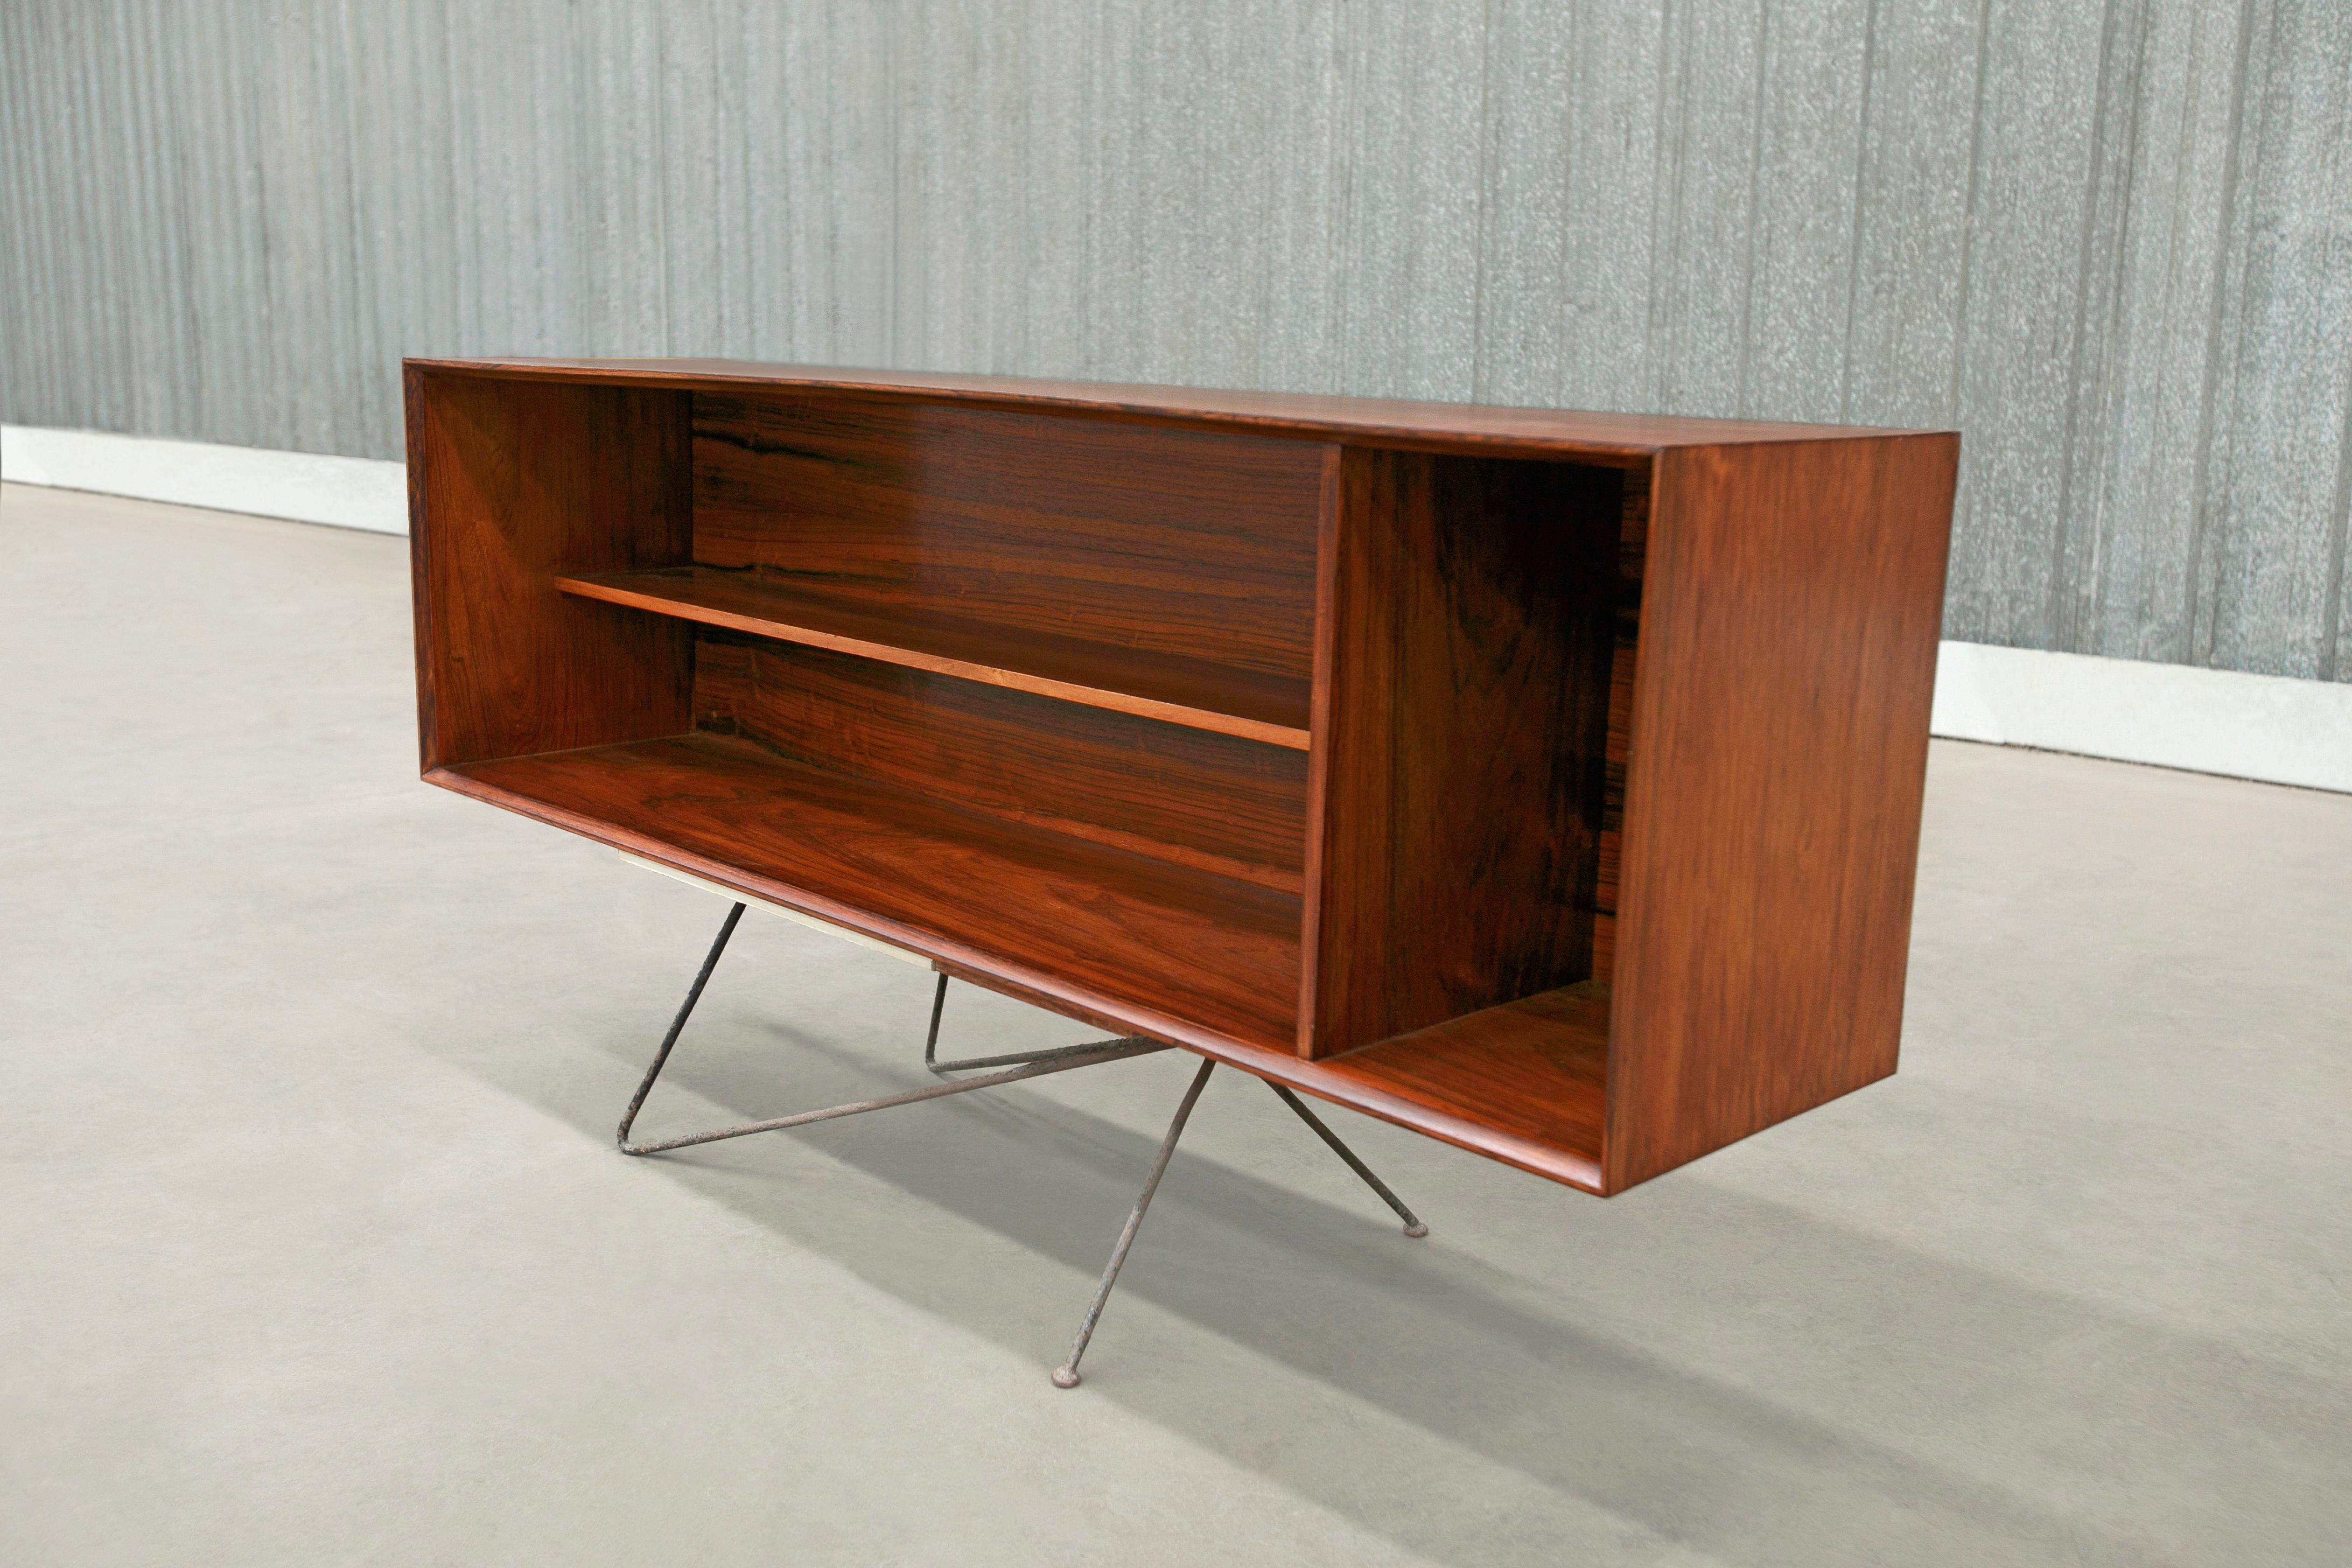 Available today with free domestic shipping (within NYC) included this Floating Sideboard or Wall Module made in Hardwood by Carlo Hauner for Forma, c. 1950 in Brazil is nothing less than the find of the year!

The piece has a very sleek and